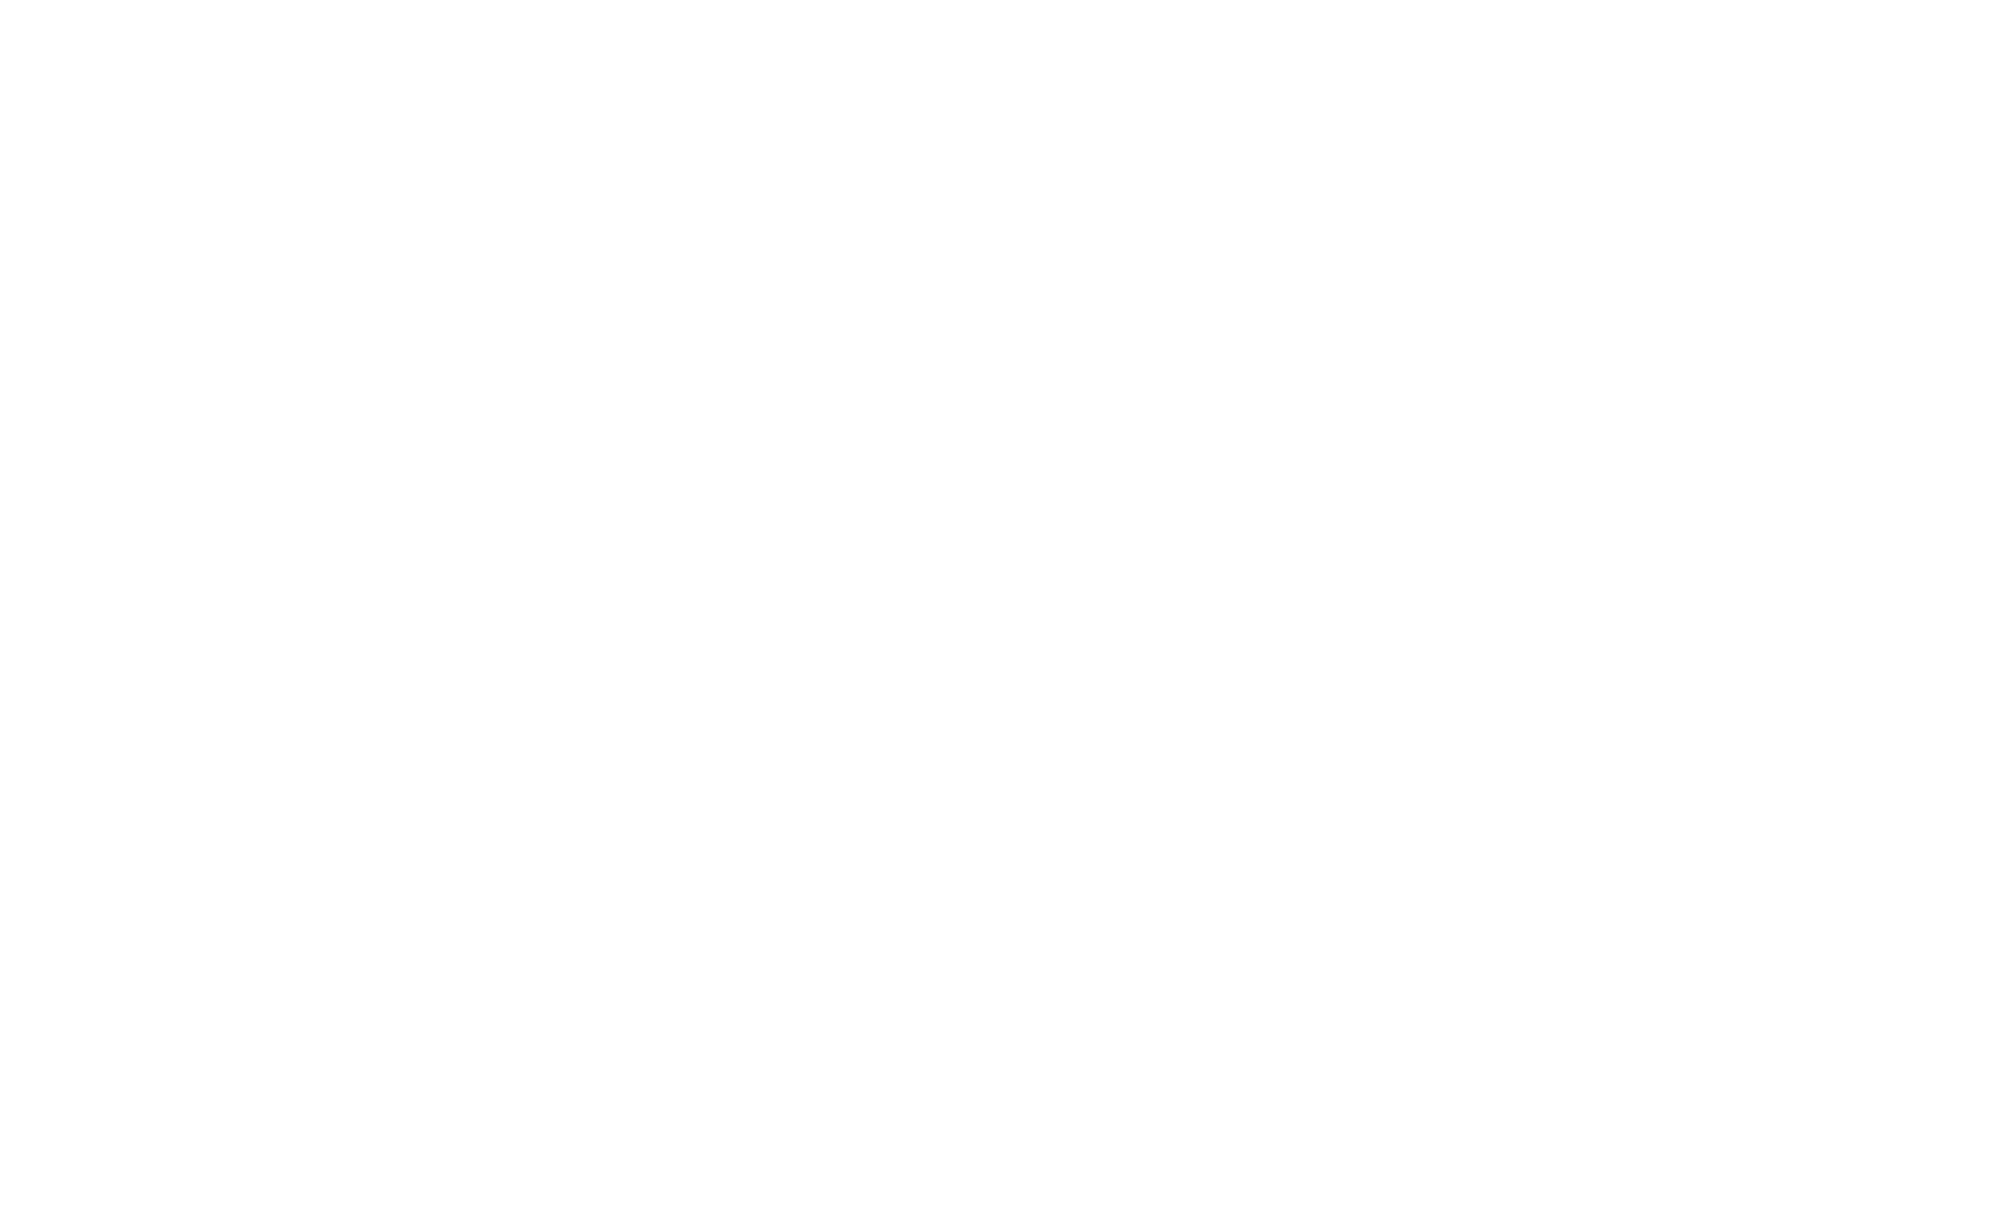 Coldwell Banker United